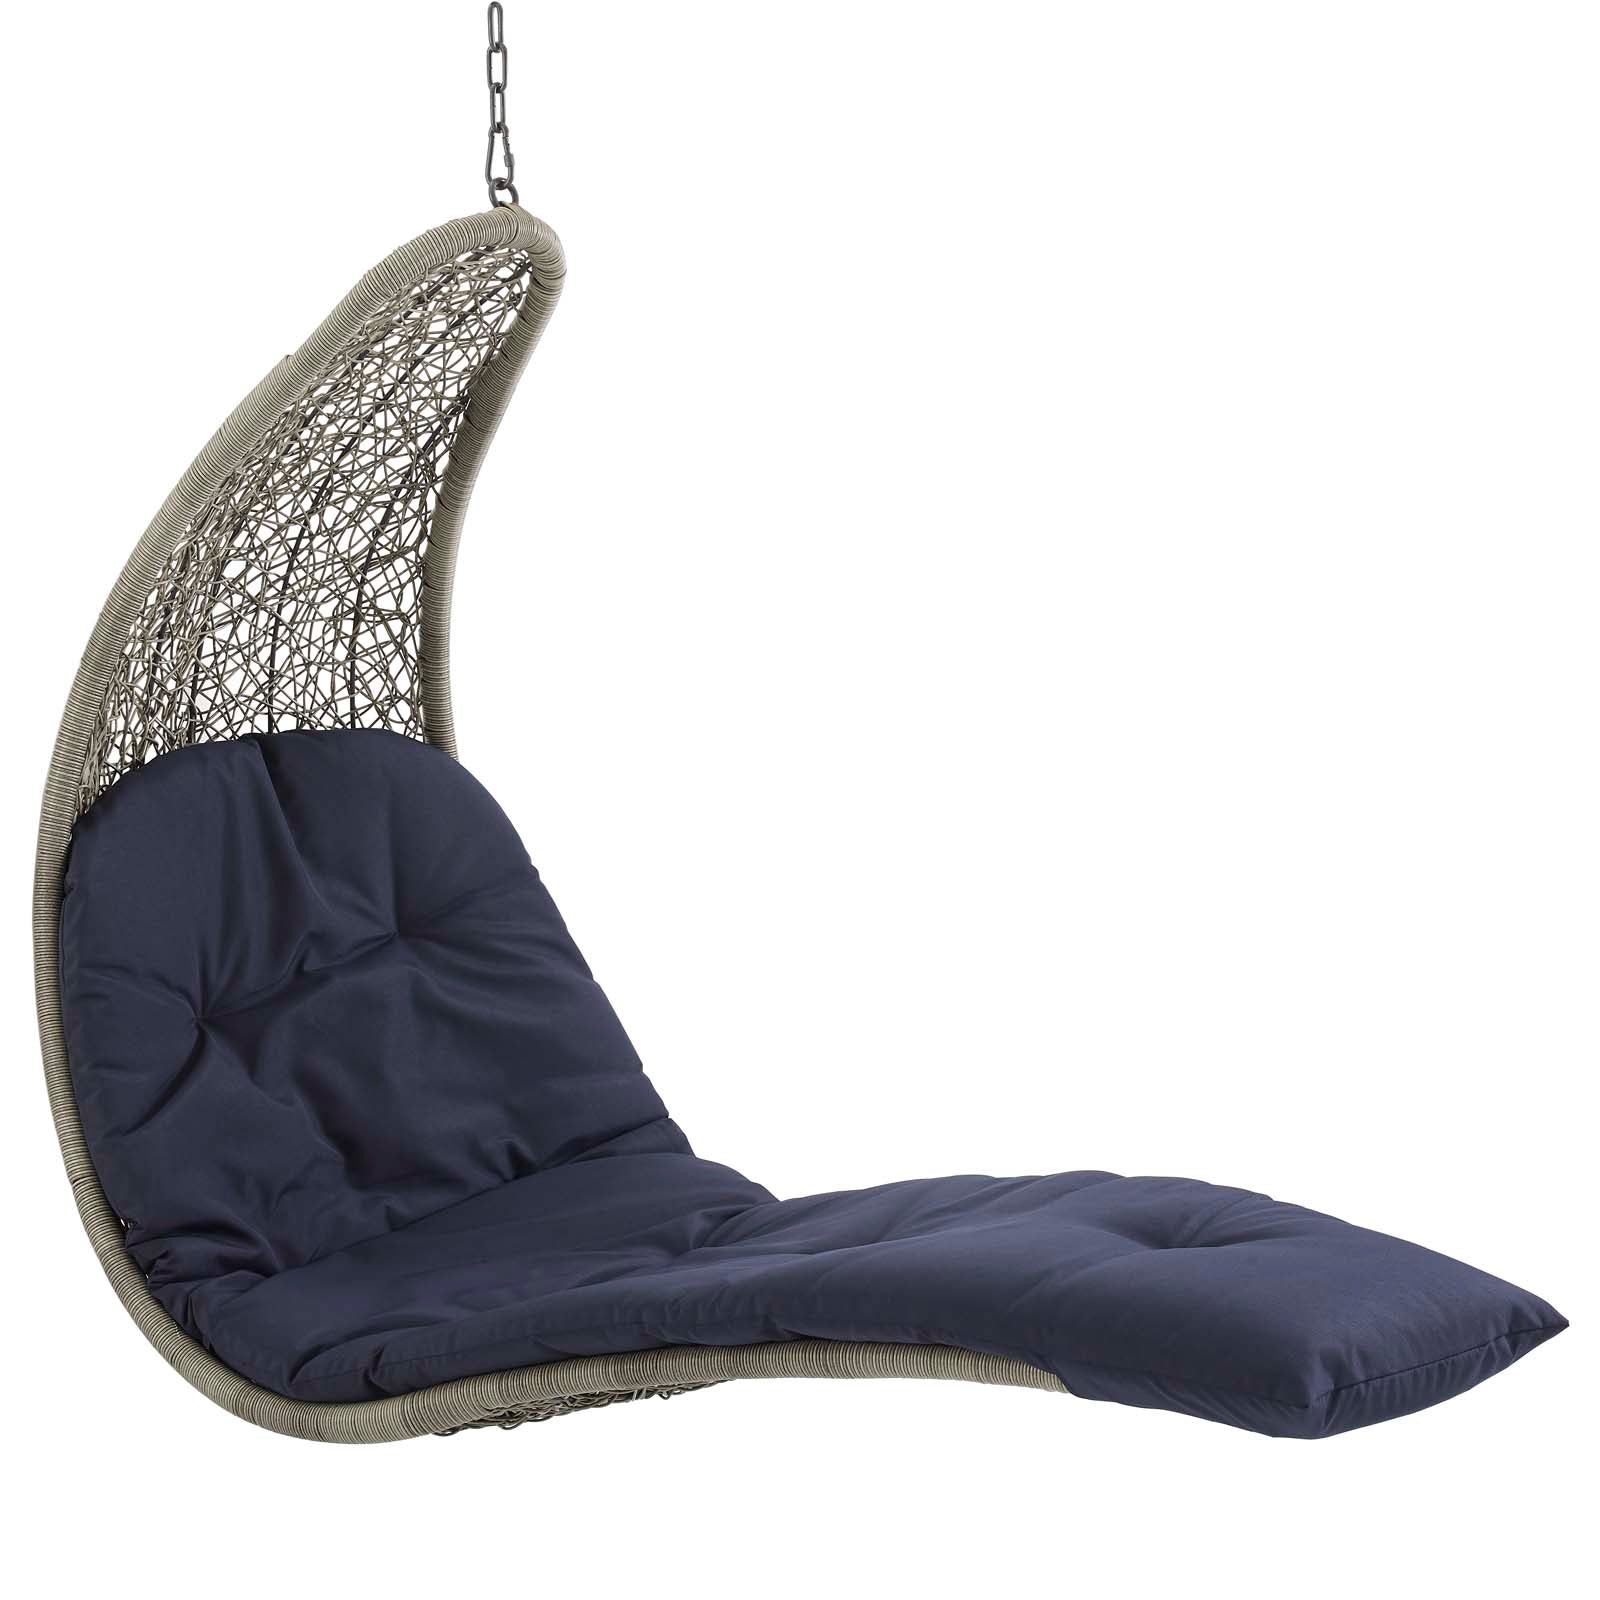 Modway Outdoor Swings - Landscape Hanging Chaise Lounge Outdoor Patio Swing Chair Light Gray Navy